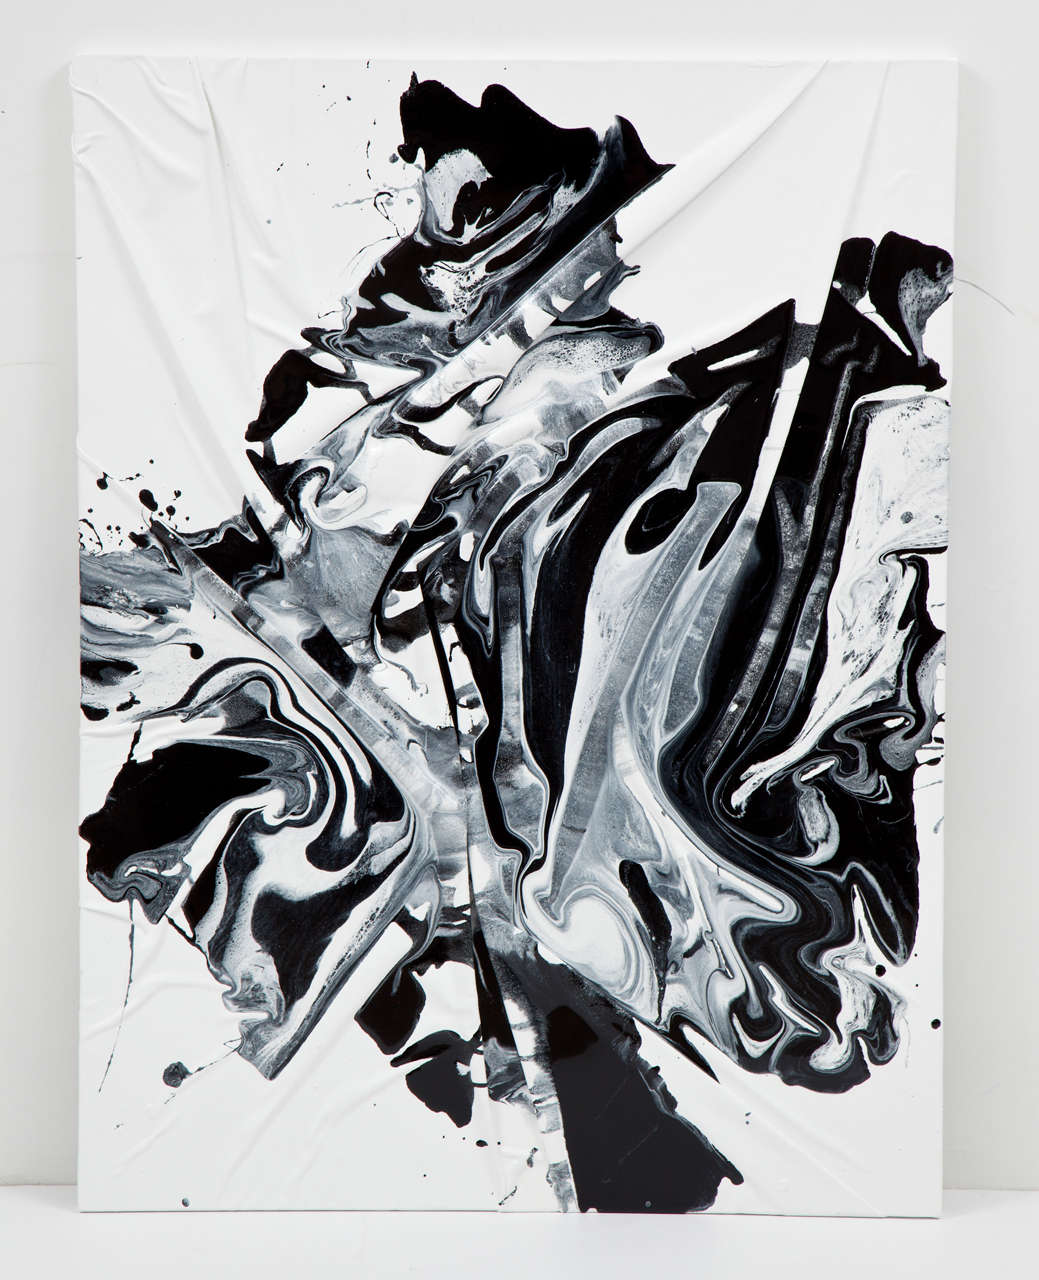 Master painting by William Kozar, Canada, 2013. High gloss epoxy on canvas.